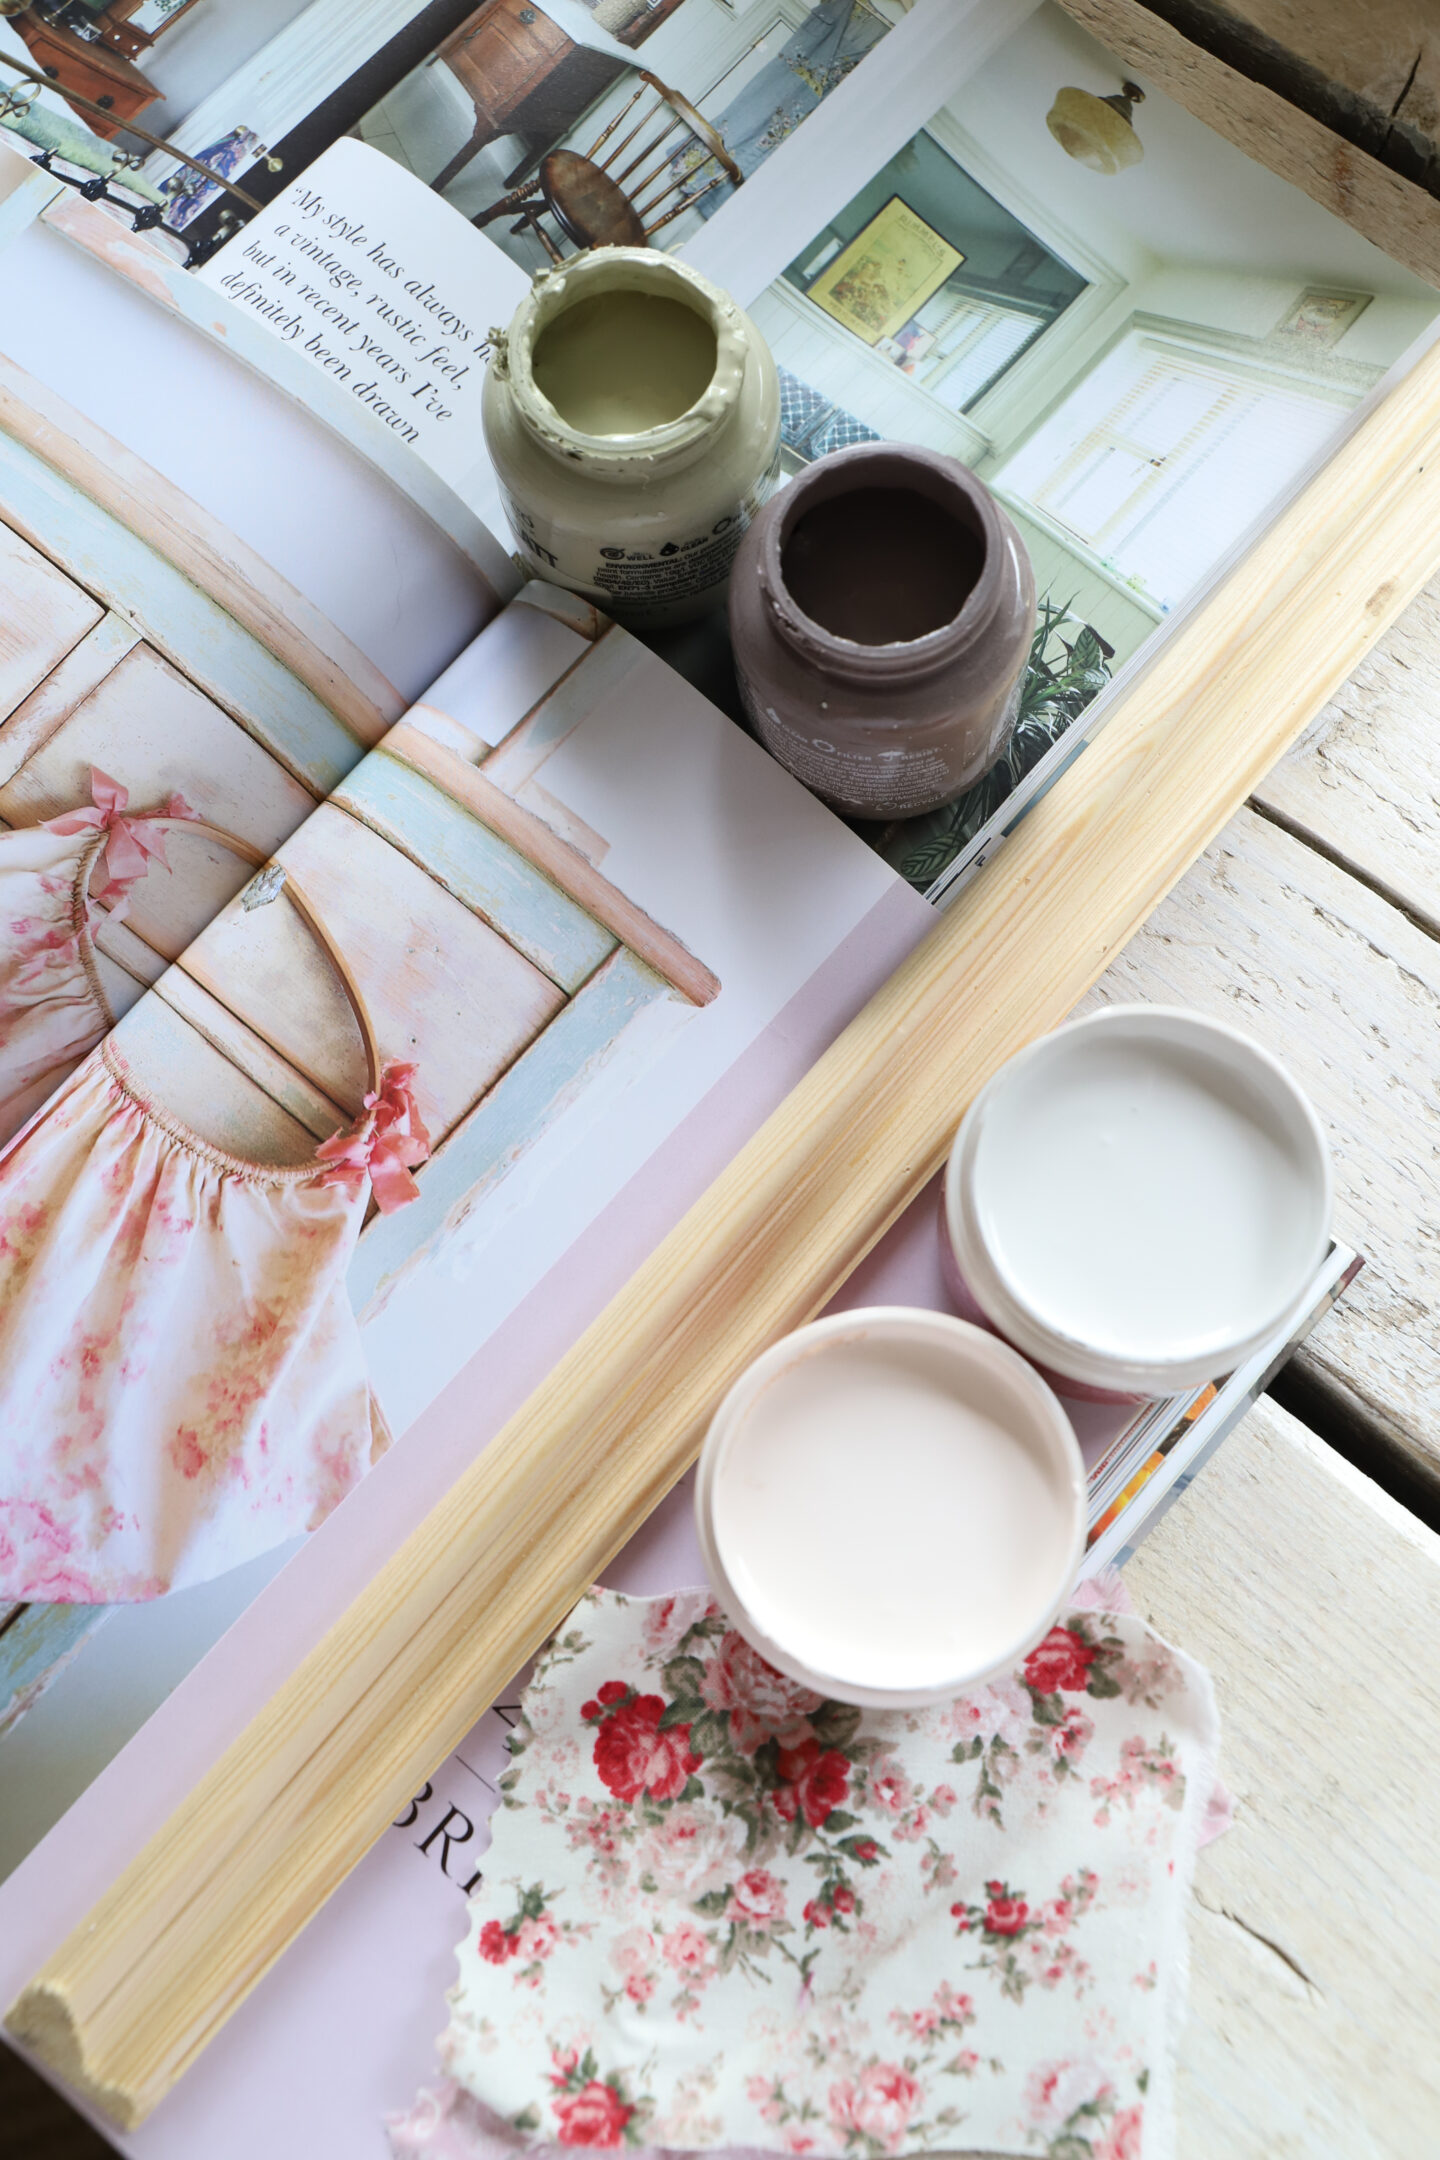 Home moodpboard in pastel shades. Spring cleaning tips. 